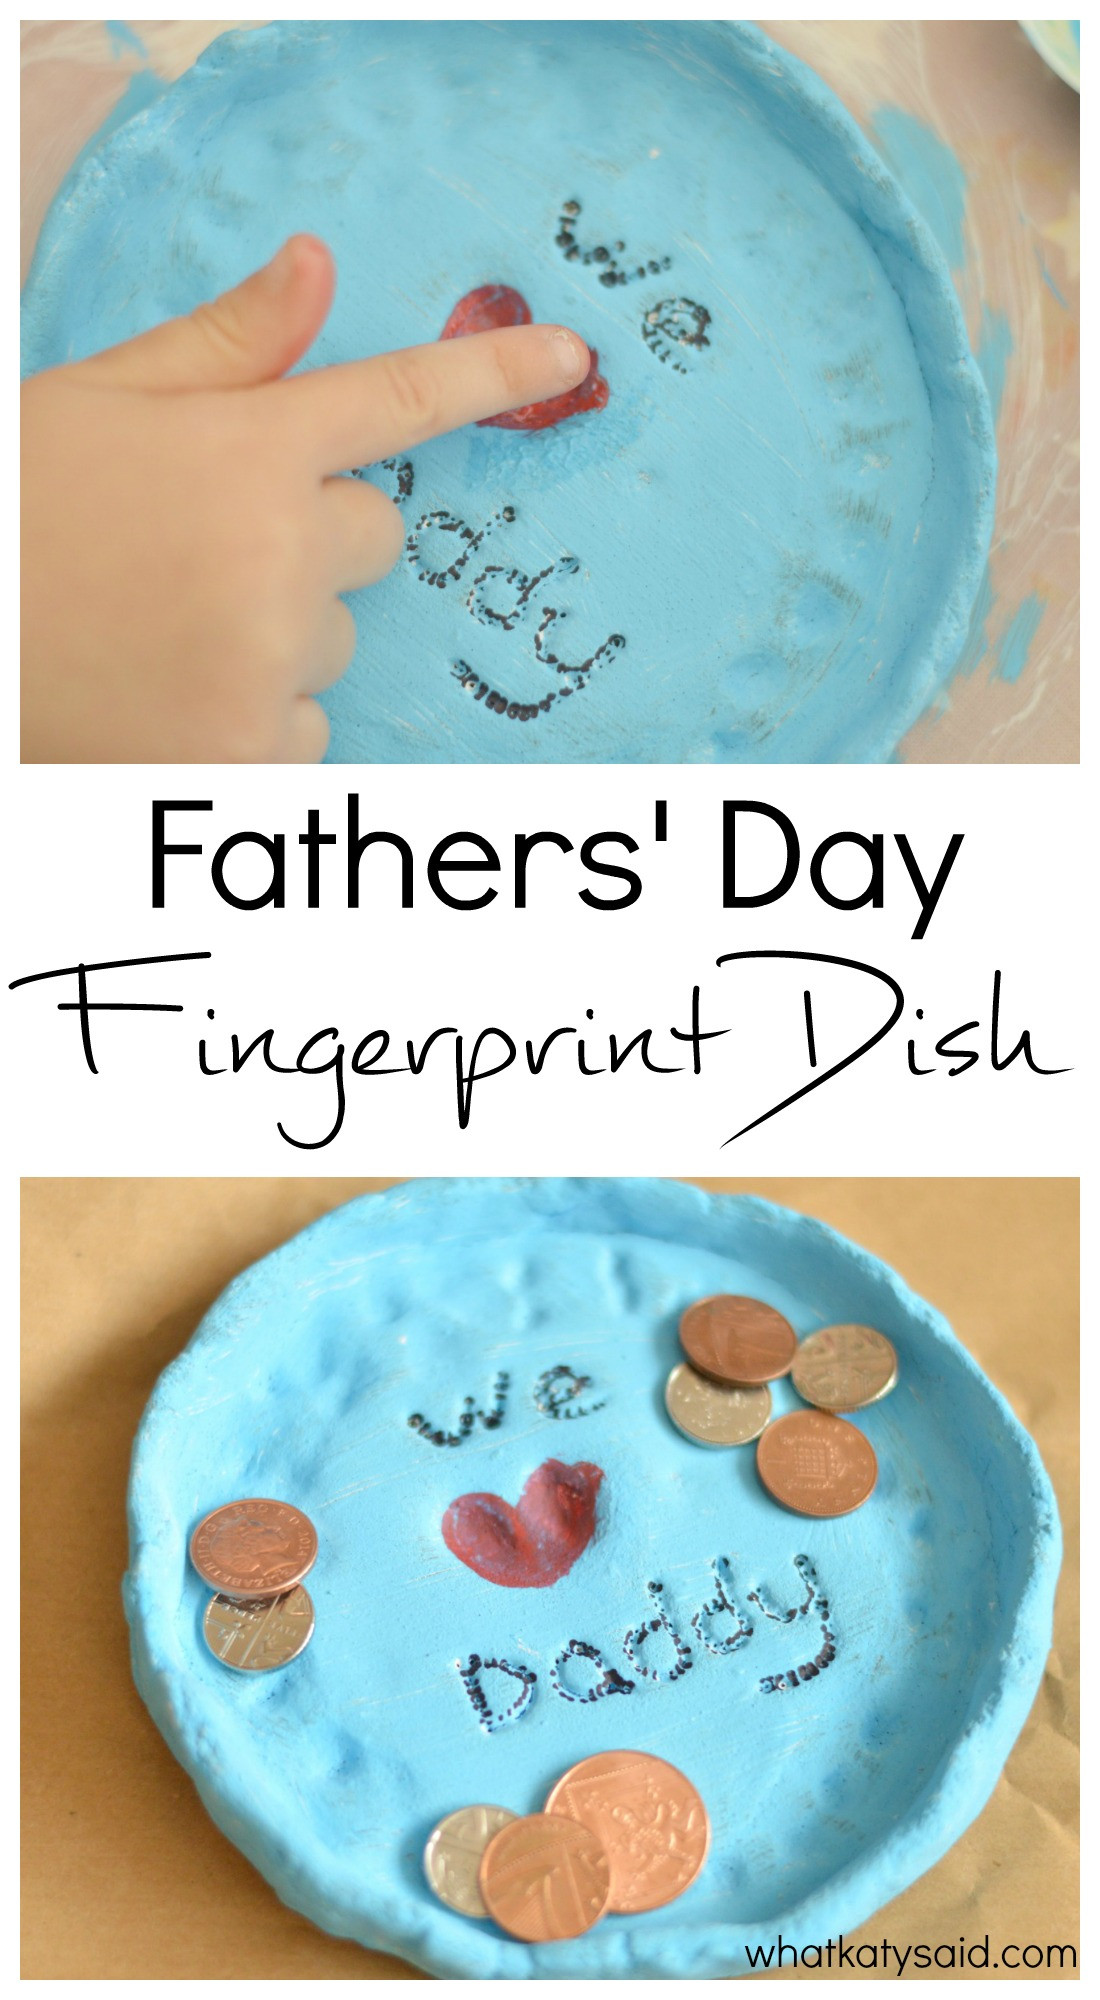 Fathers Day Gift Ideas Crafts
 25 Father’s Day Craft and Gift Ideas for kids